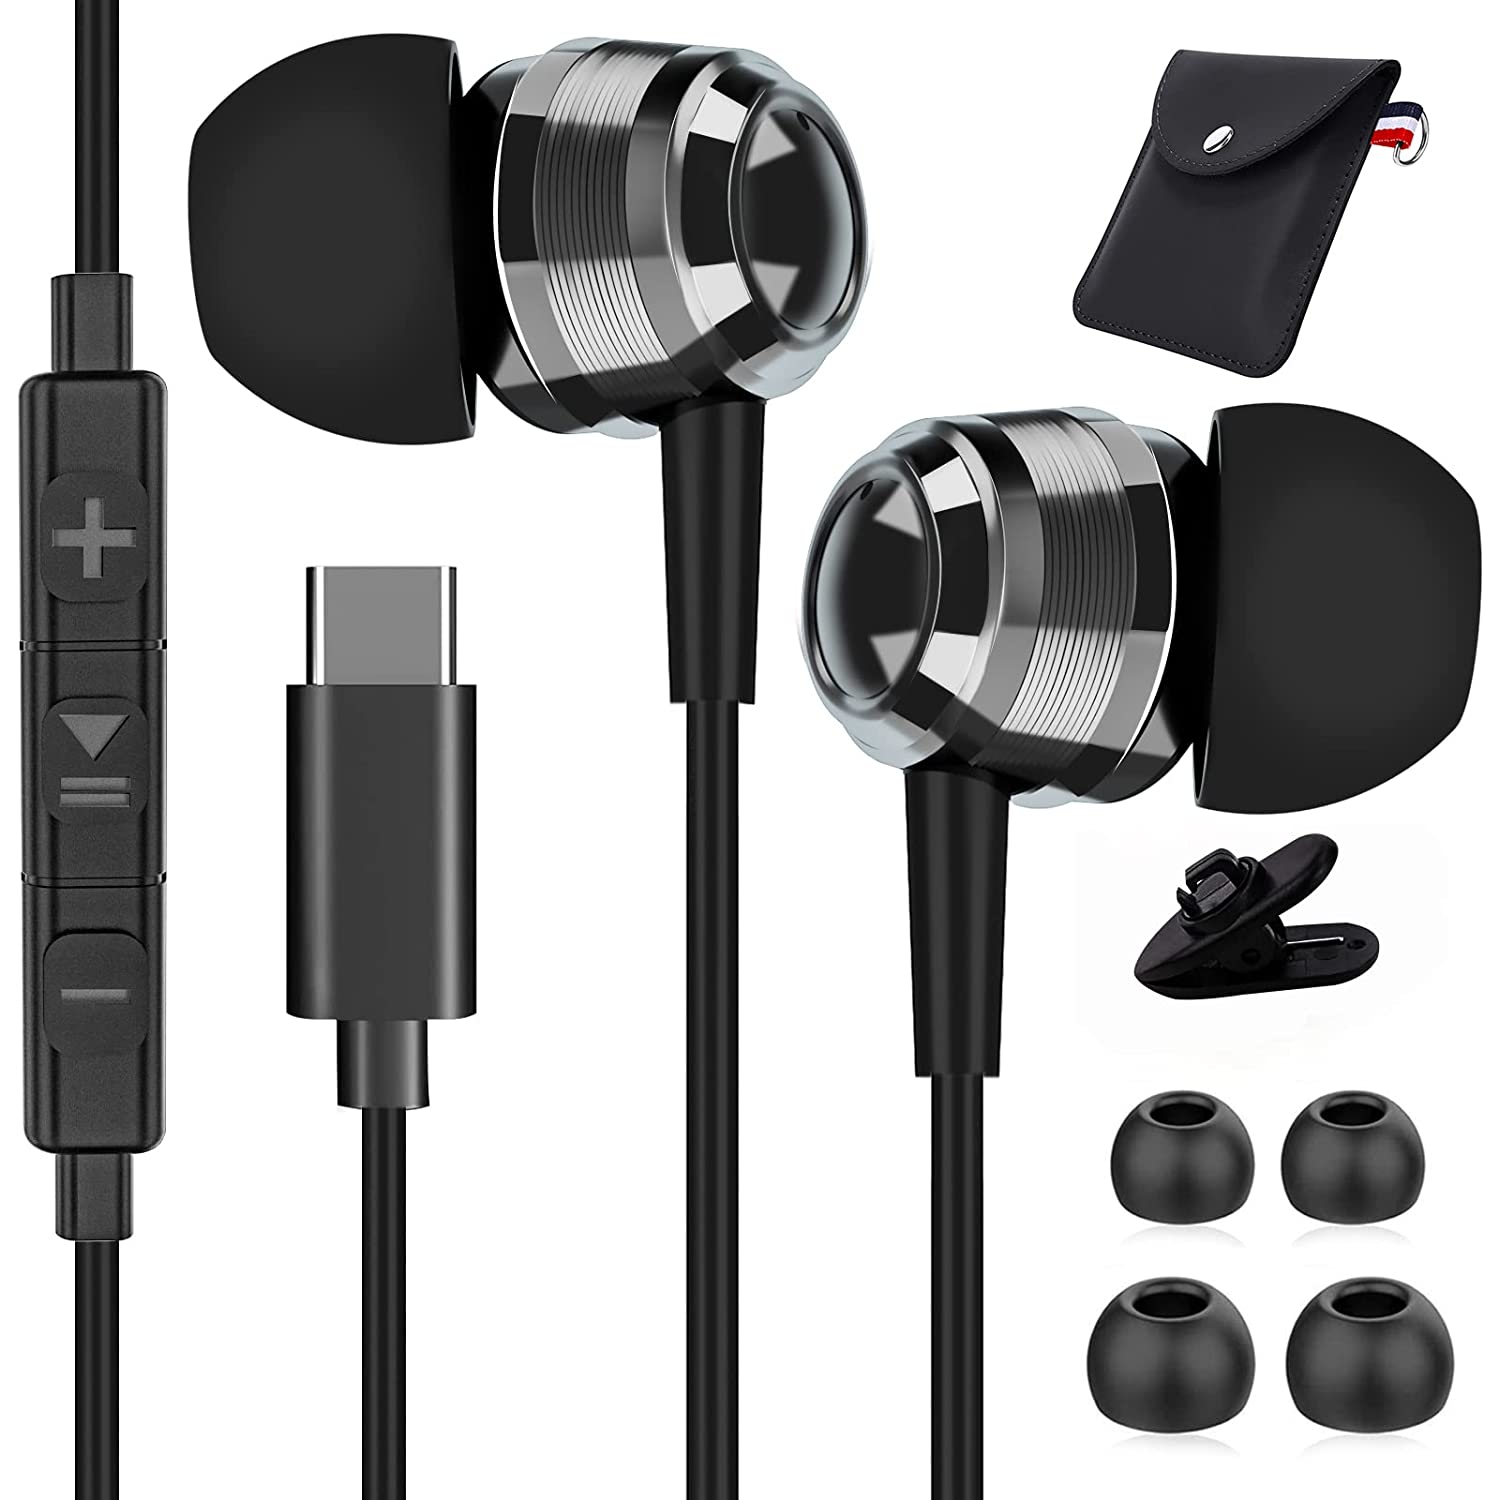 Dolaer USB C Headphones for Samsung S22 Ultra, in Ear USB C Earbuds with Microphone HiFi Stereo Noise Cancelling Wired Earphones Type C for Galaxy S21 S20 FE Z Flip 3 iPad Air 4 Go